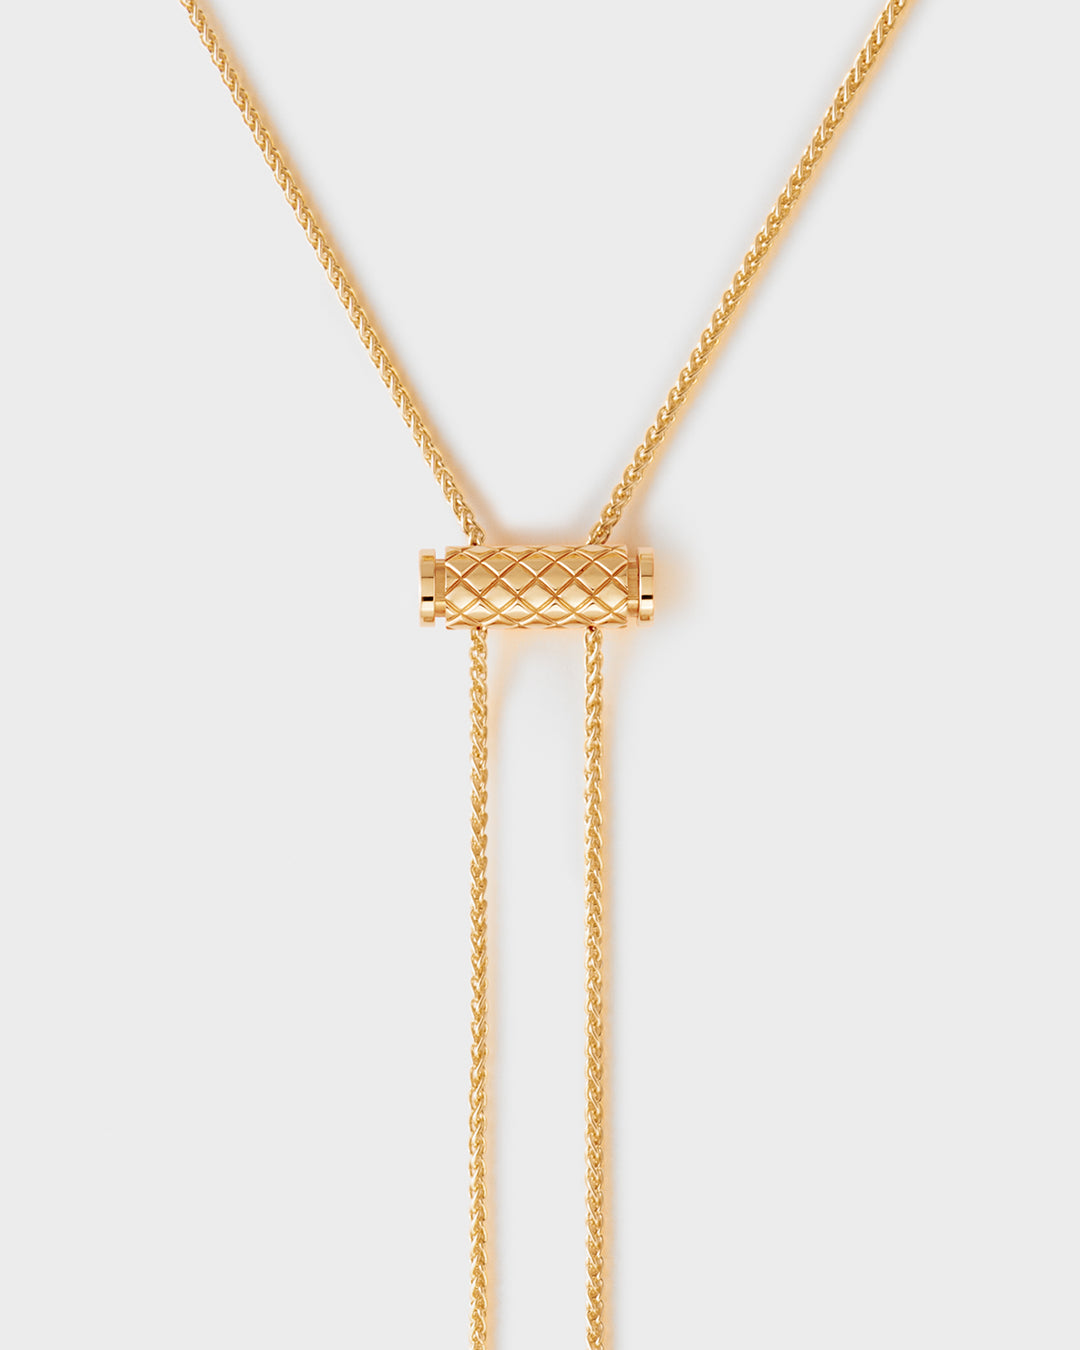 Gold Latch Pendant on GM Chain in Yellow Gold - 1 - Nouvel Heritage